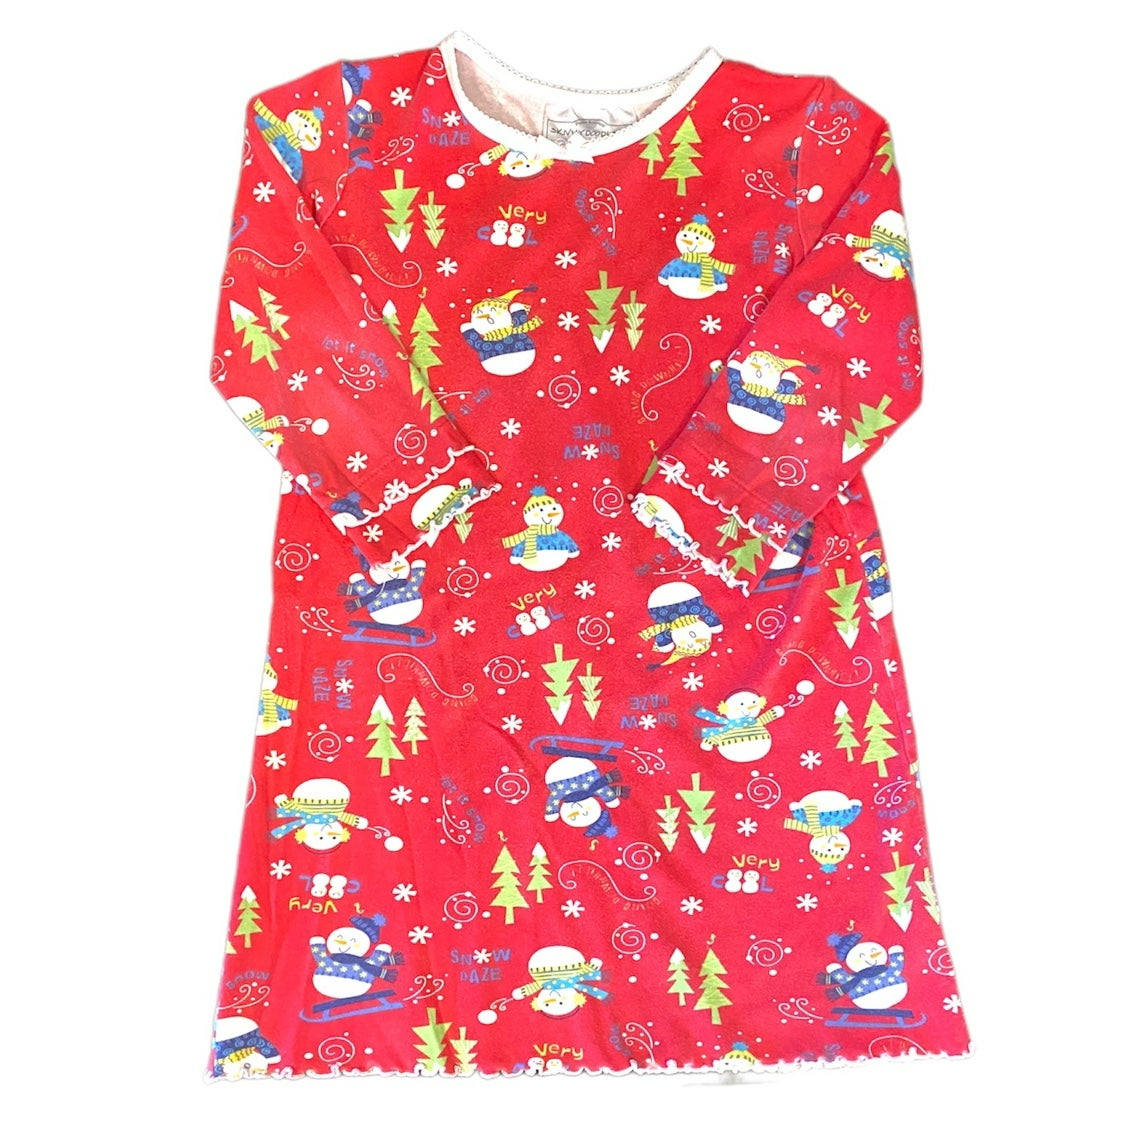 Size 6 girls Christmas gown